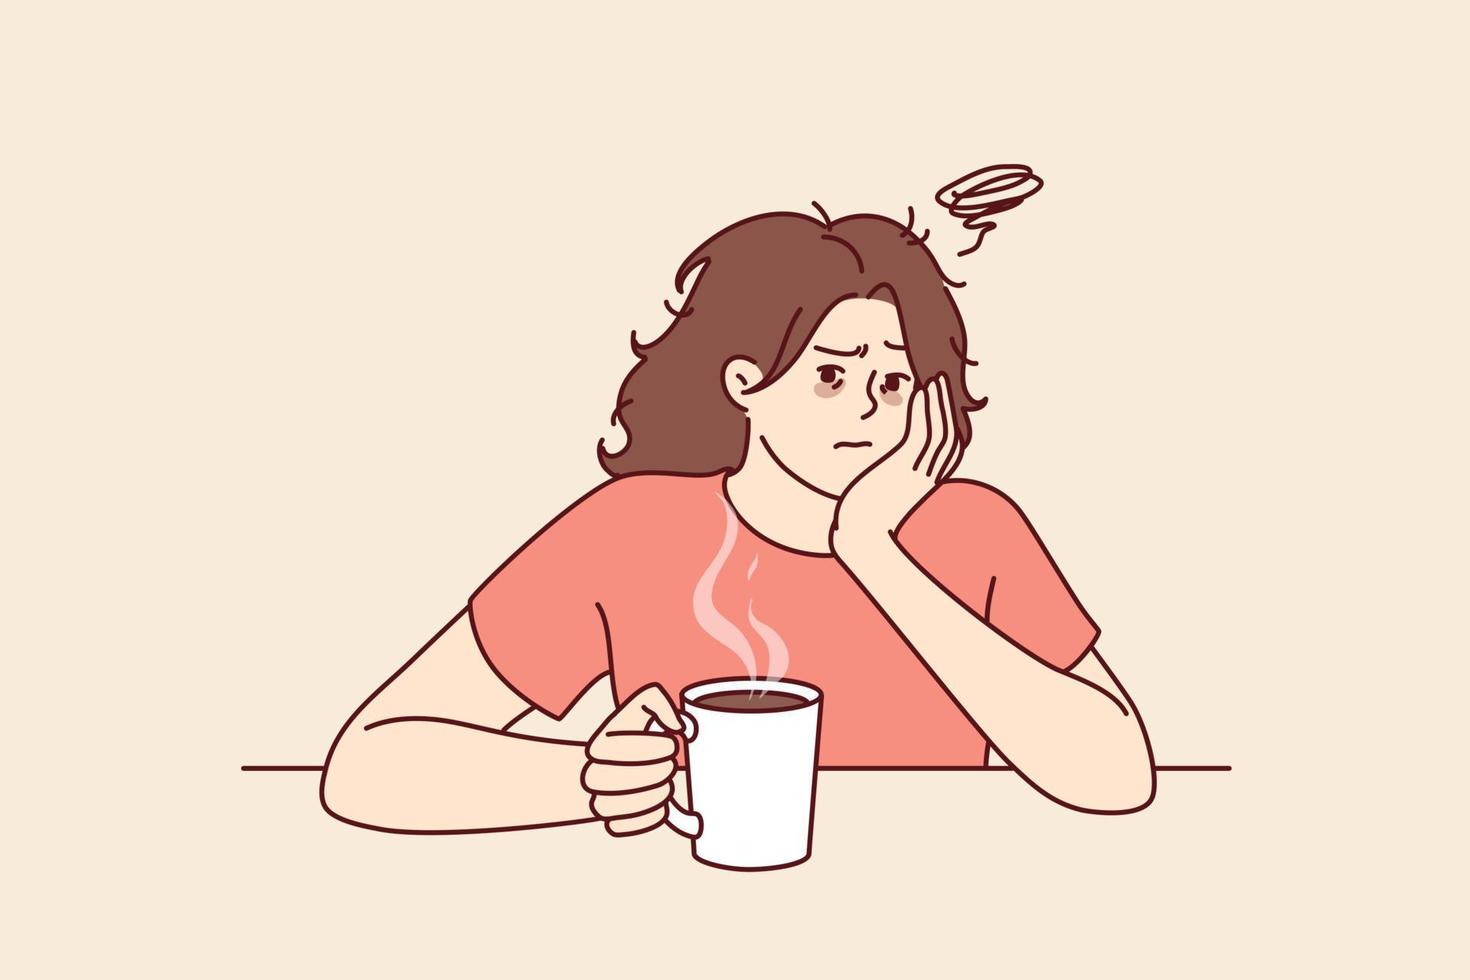 Tired woman with sad face drinks hot coffee and does not want to go to work due to lack of sleep. Upset girl is sitting at table with mug of coffee on Monday morning and is sad because weekend is over vector